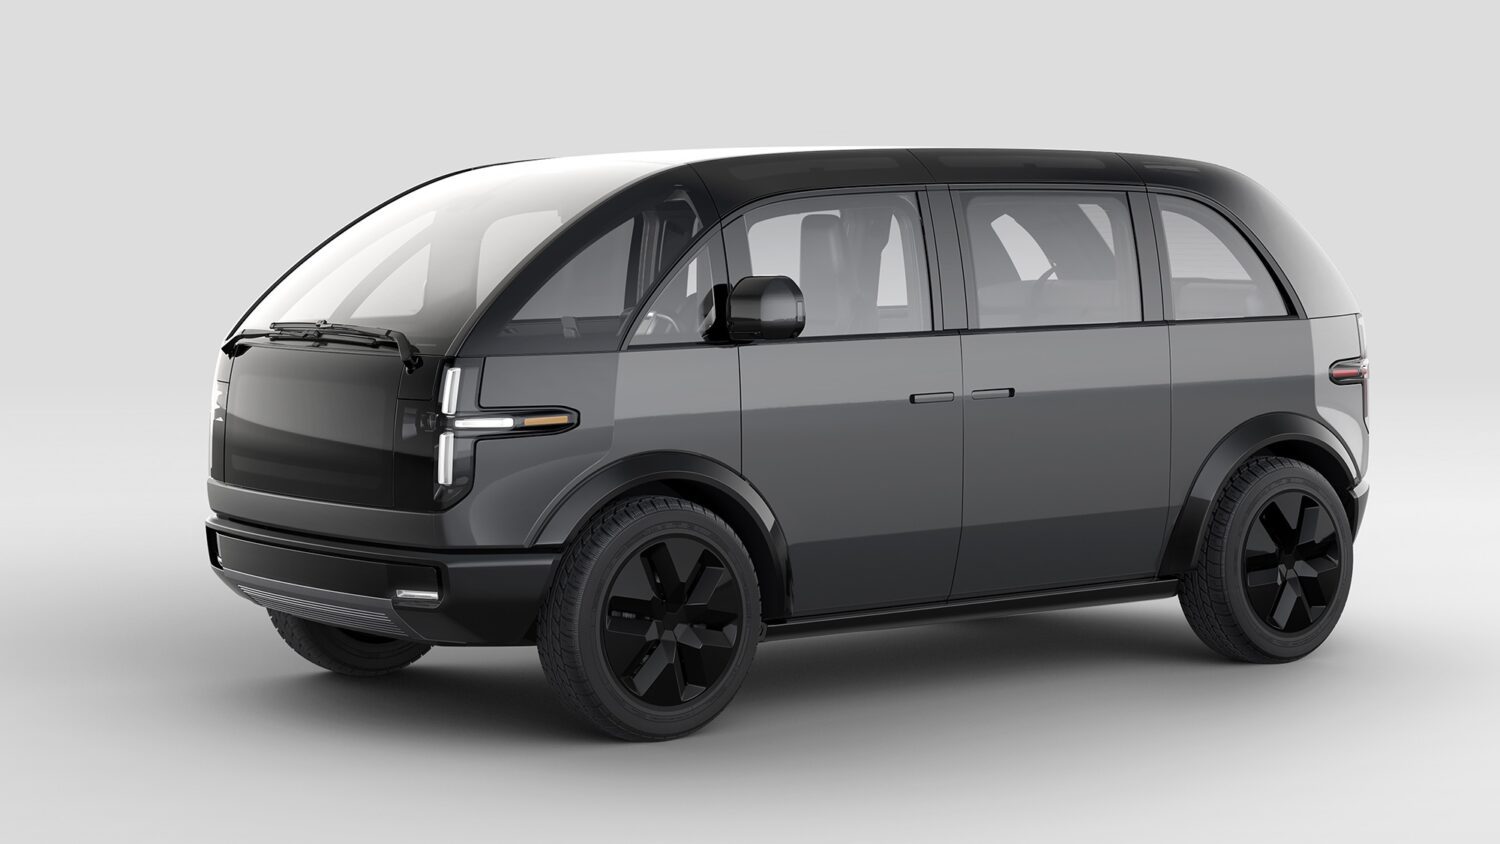 Best Van Of 2022 Also Named “Just Butt Ugly”